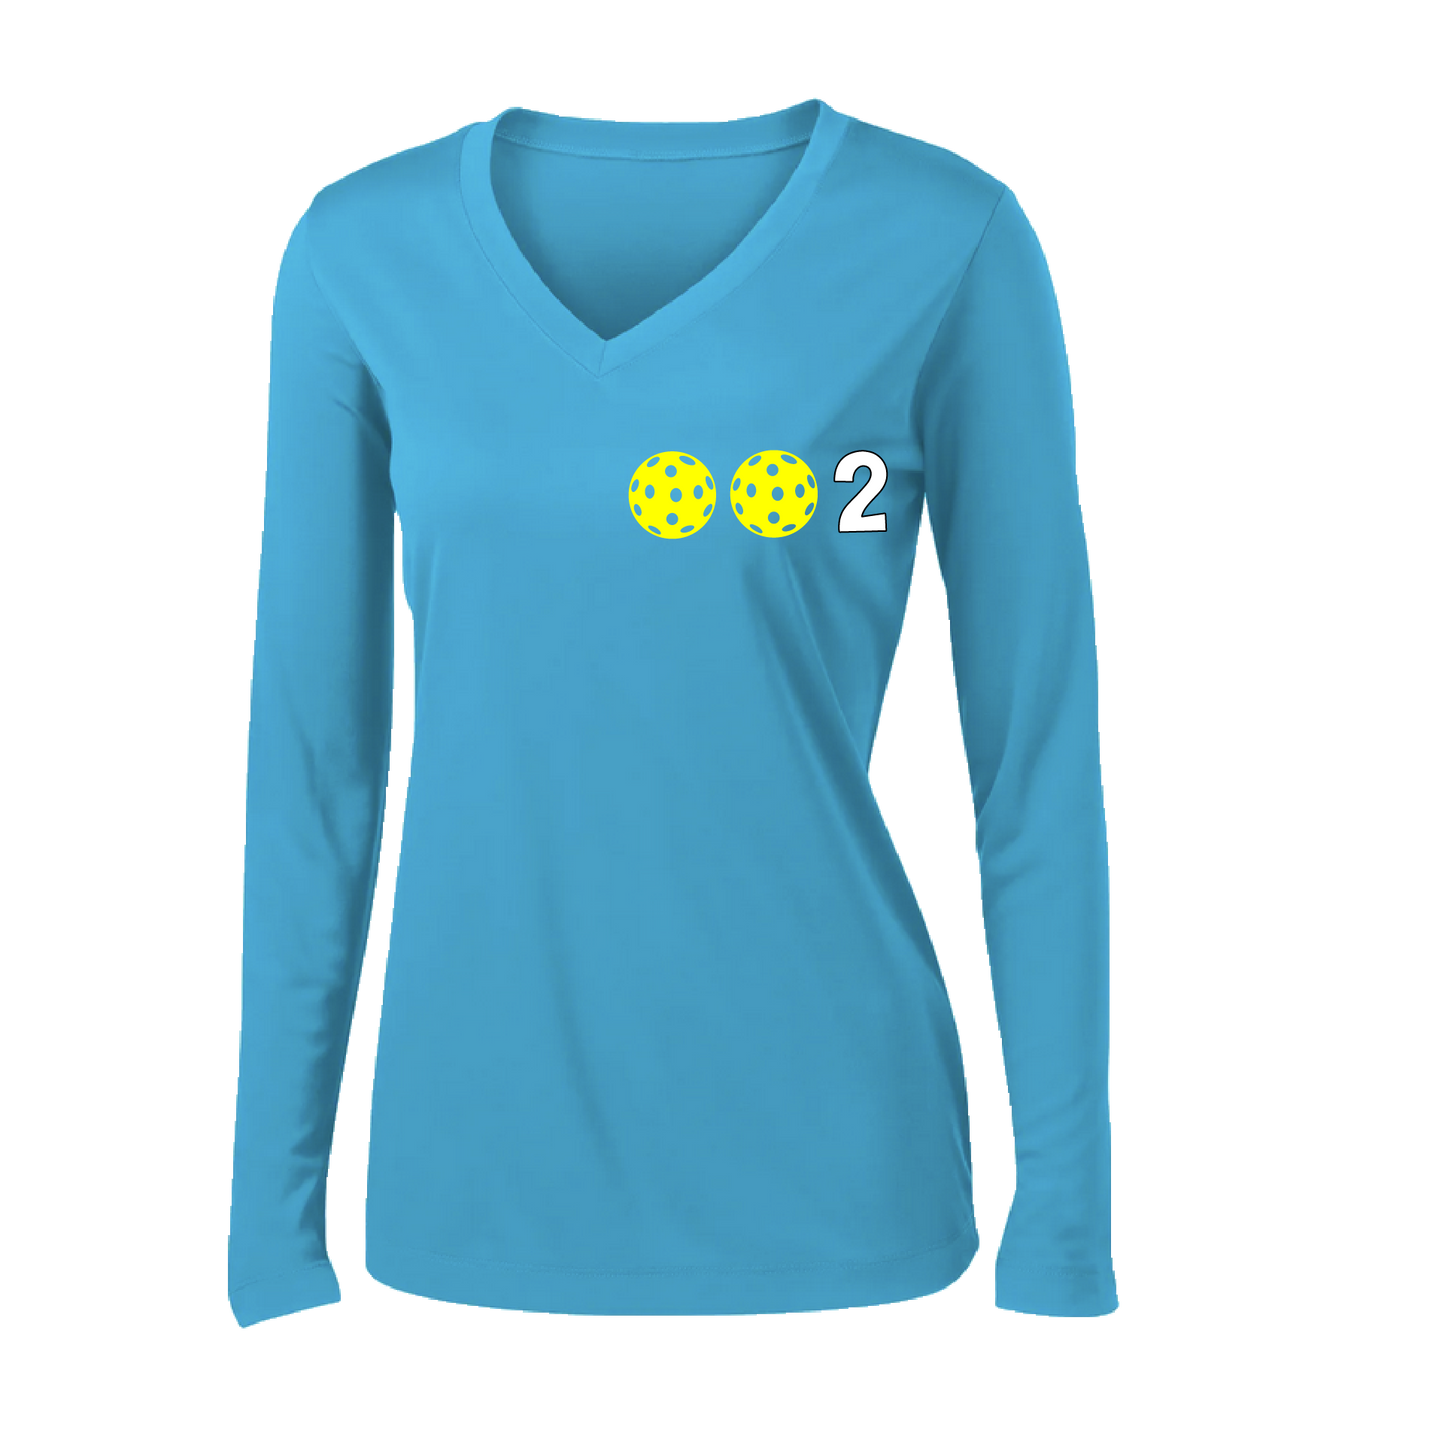 Design: 002 with Customizable Ball Colors (Yellow, Pink, White)  Women's Style:  Long-Sleeve V-Neck  Shirts are lightweight, roomy and highly breathable. These moisture-wicking shirts are designed for athletic performance. They feature PosiCharge technology to lock in color and prevent logos from fading. Removable tag and set-in sleeves for comfo